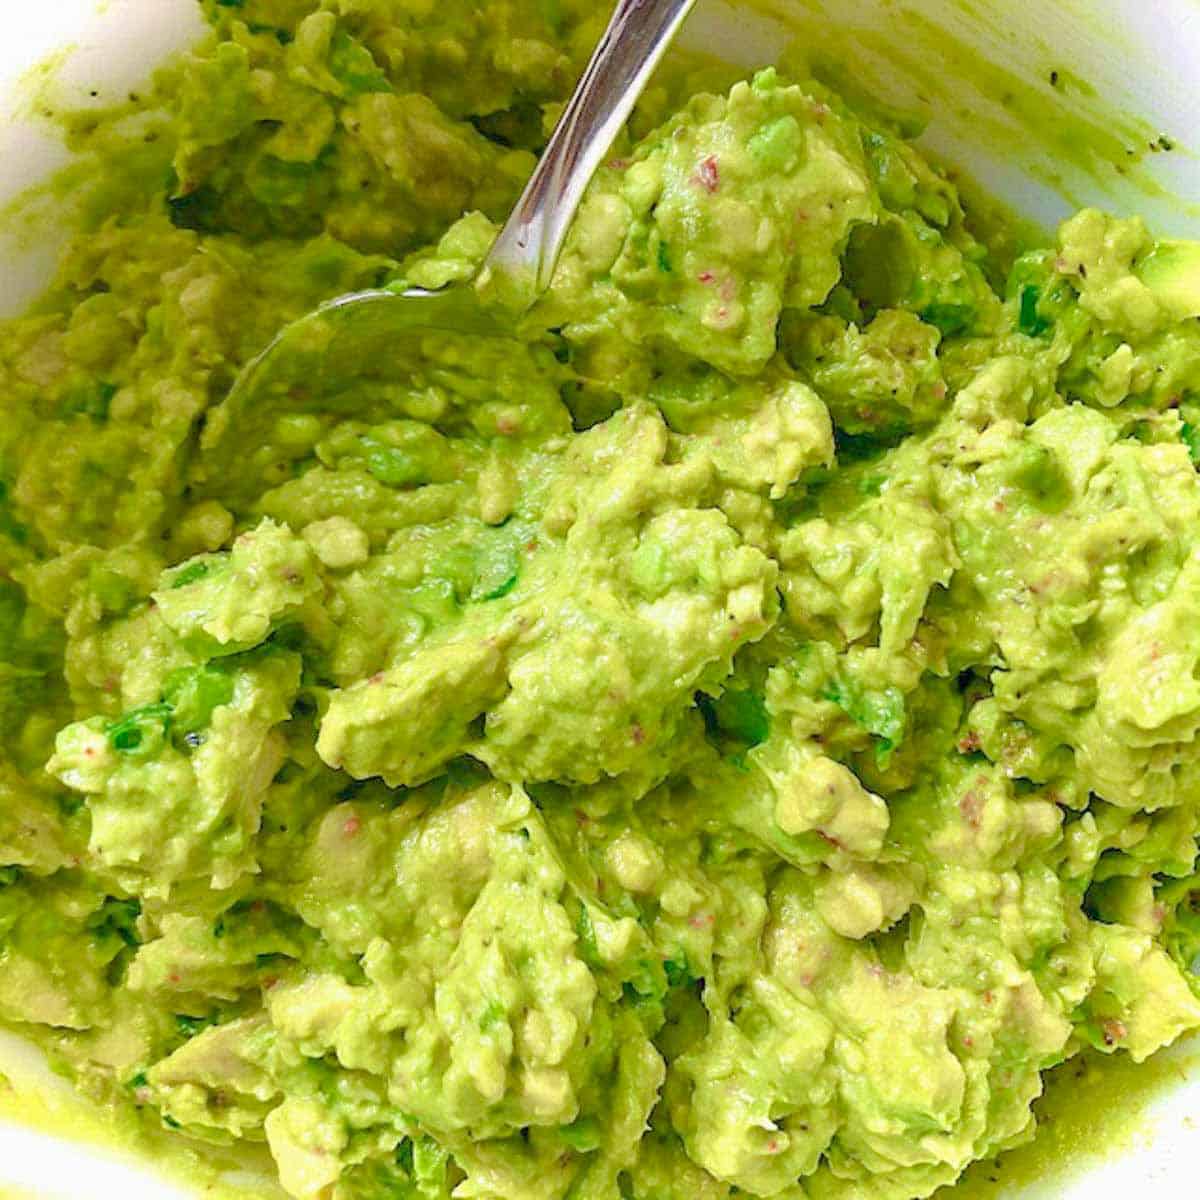 Guacamole ingredients mashed together and in a bowl with a spoon.